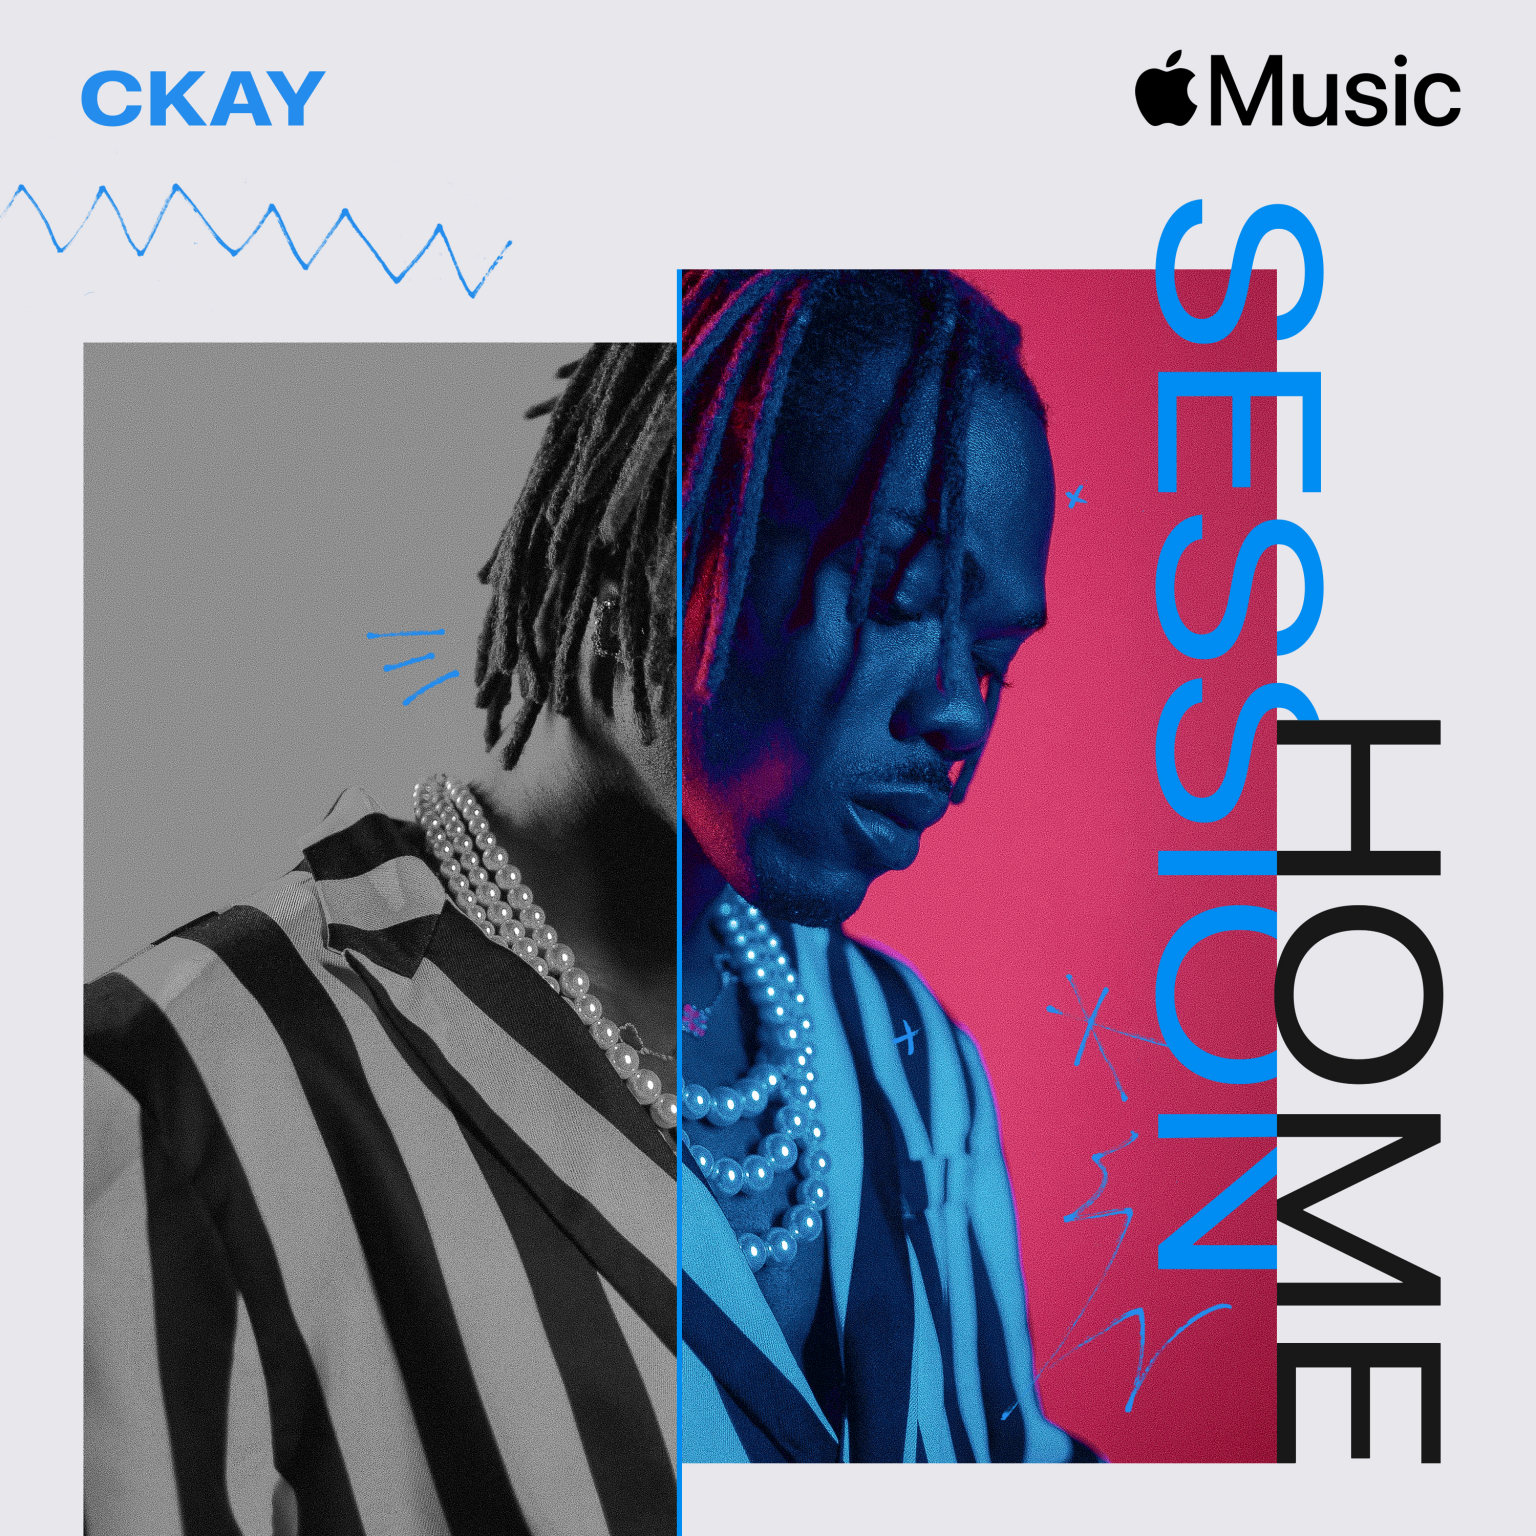 Apple Music Home Session features Afropop rising star CKay